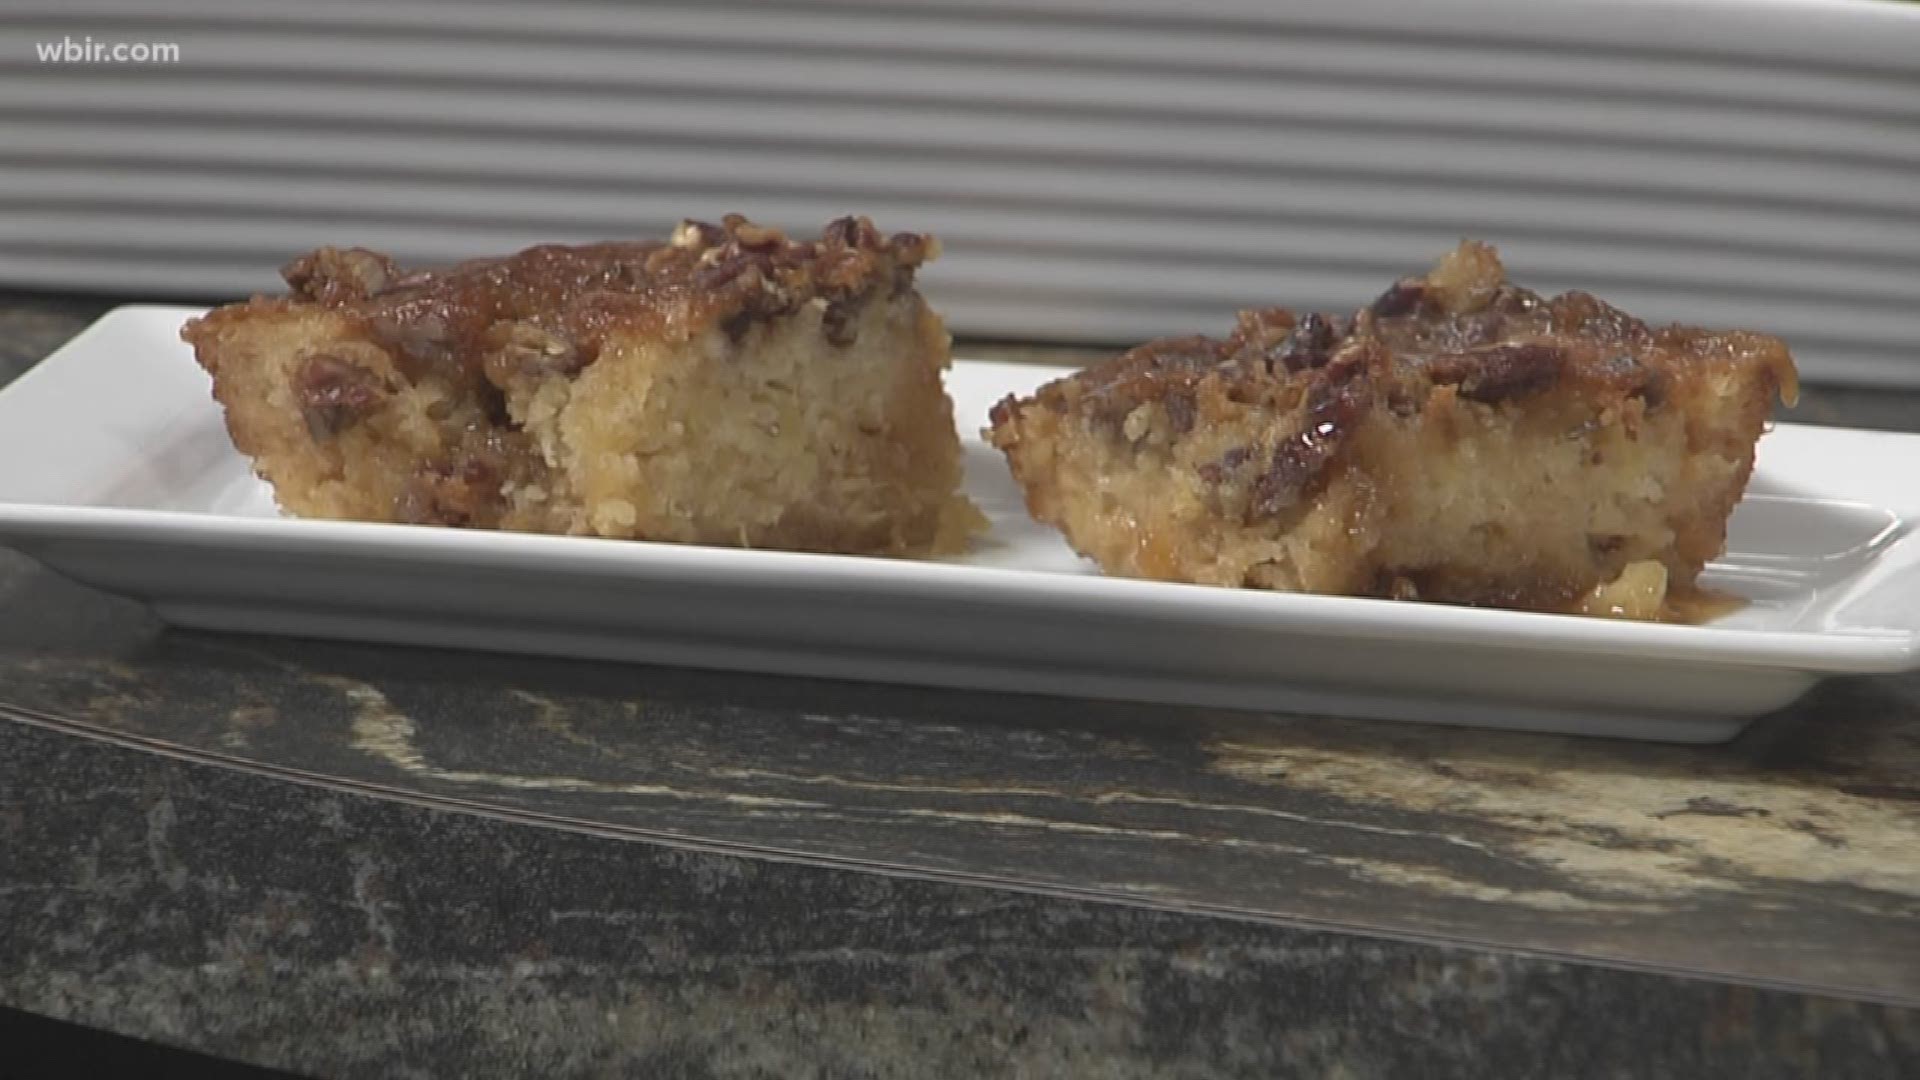 We're in the kitchen with Betty Henry making a tasty pineapple pecan cake.